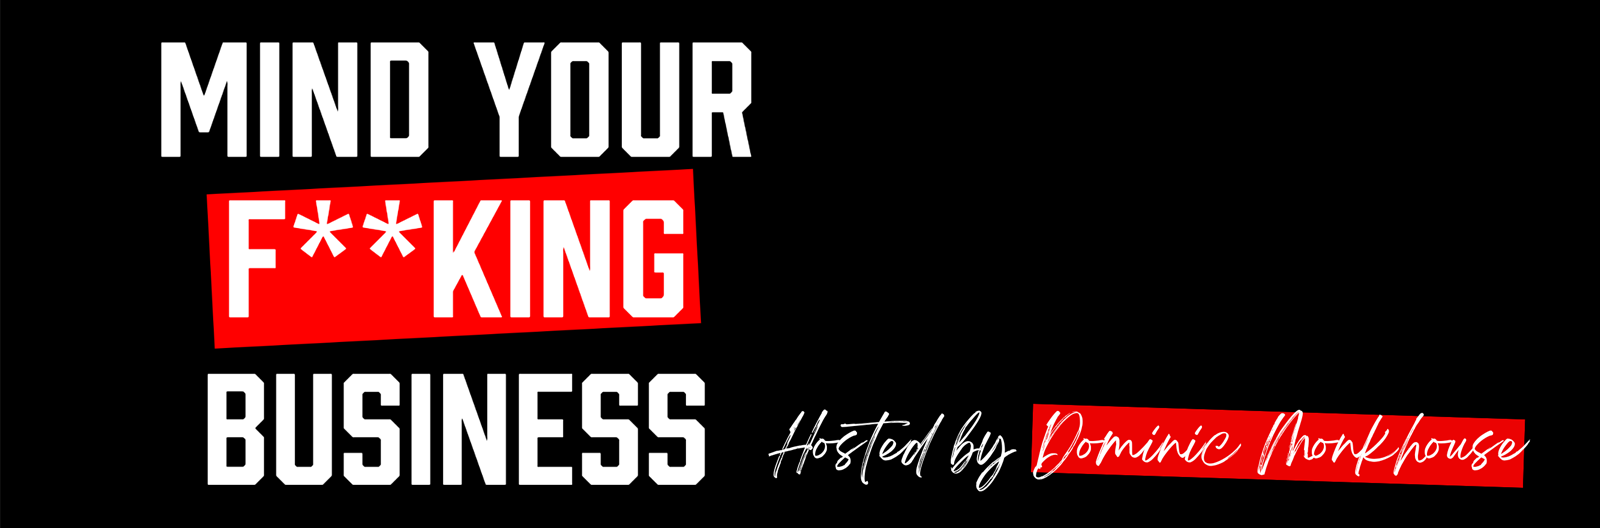 Mind your F**king Business Hosted by Dominic Monkhouse